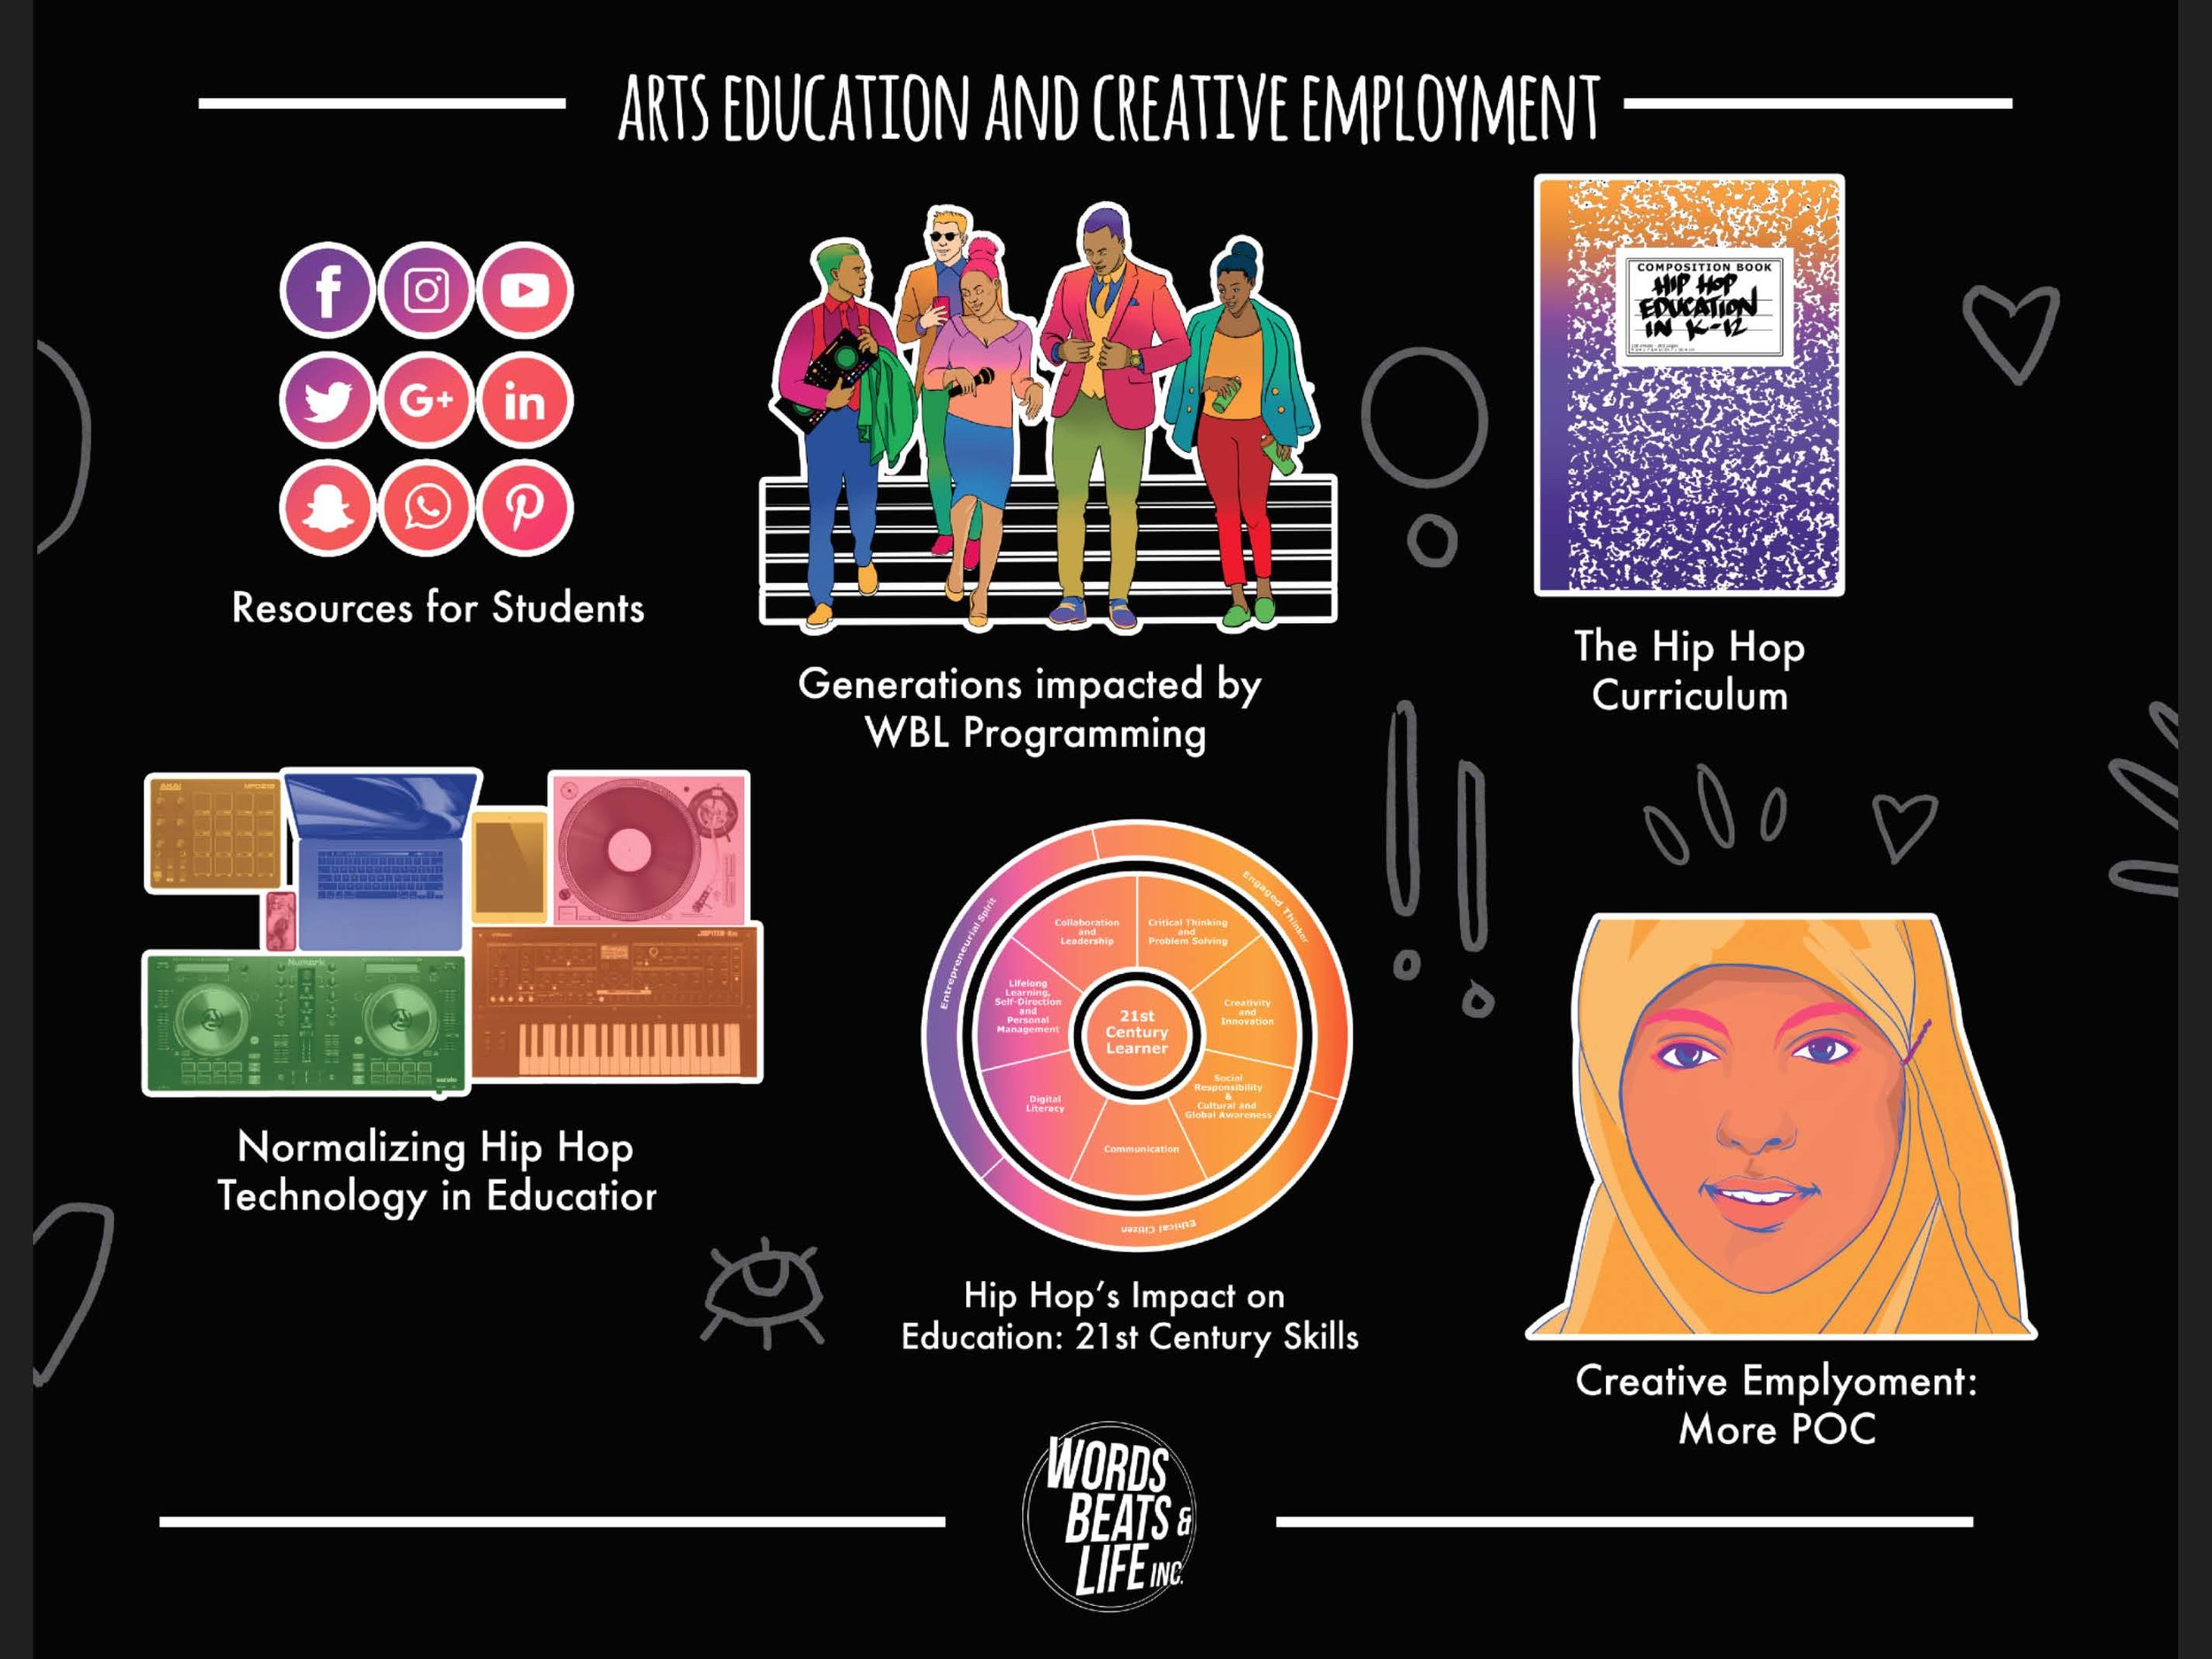 Information about arts education and creative employment